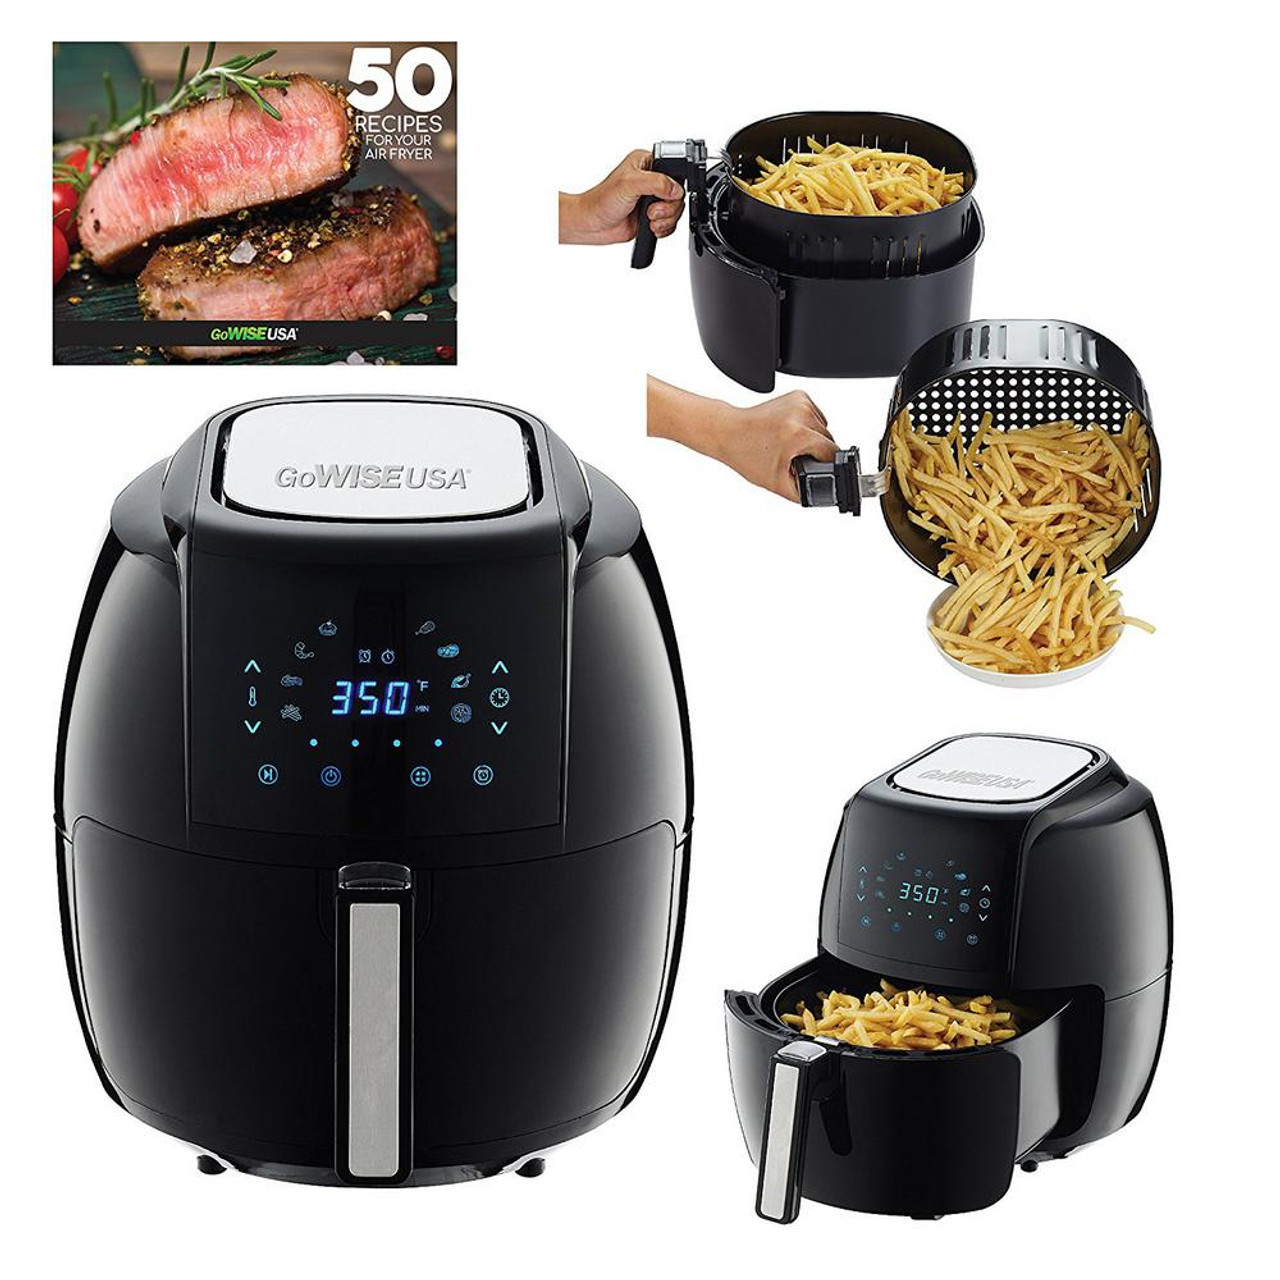  GoWISE USA 1700-Watt 5.8-QT 8-in-1 Digital Air Fryer with  Recipe Book, Black : Home & Kitchen